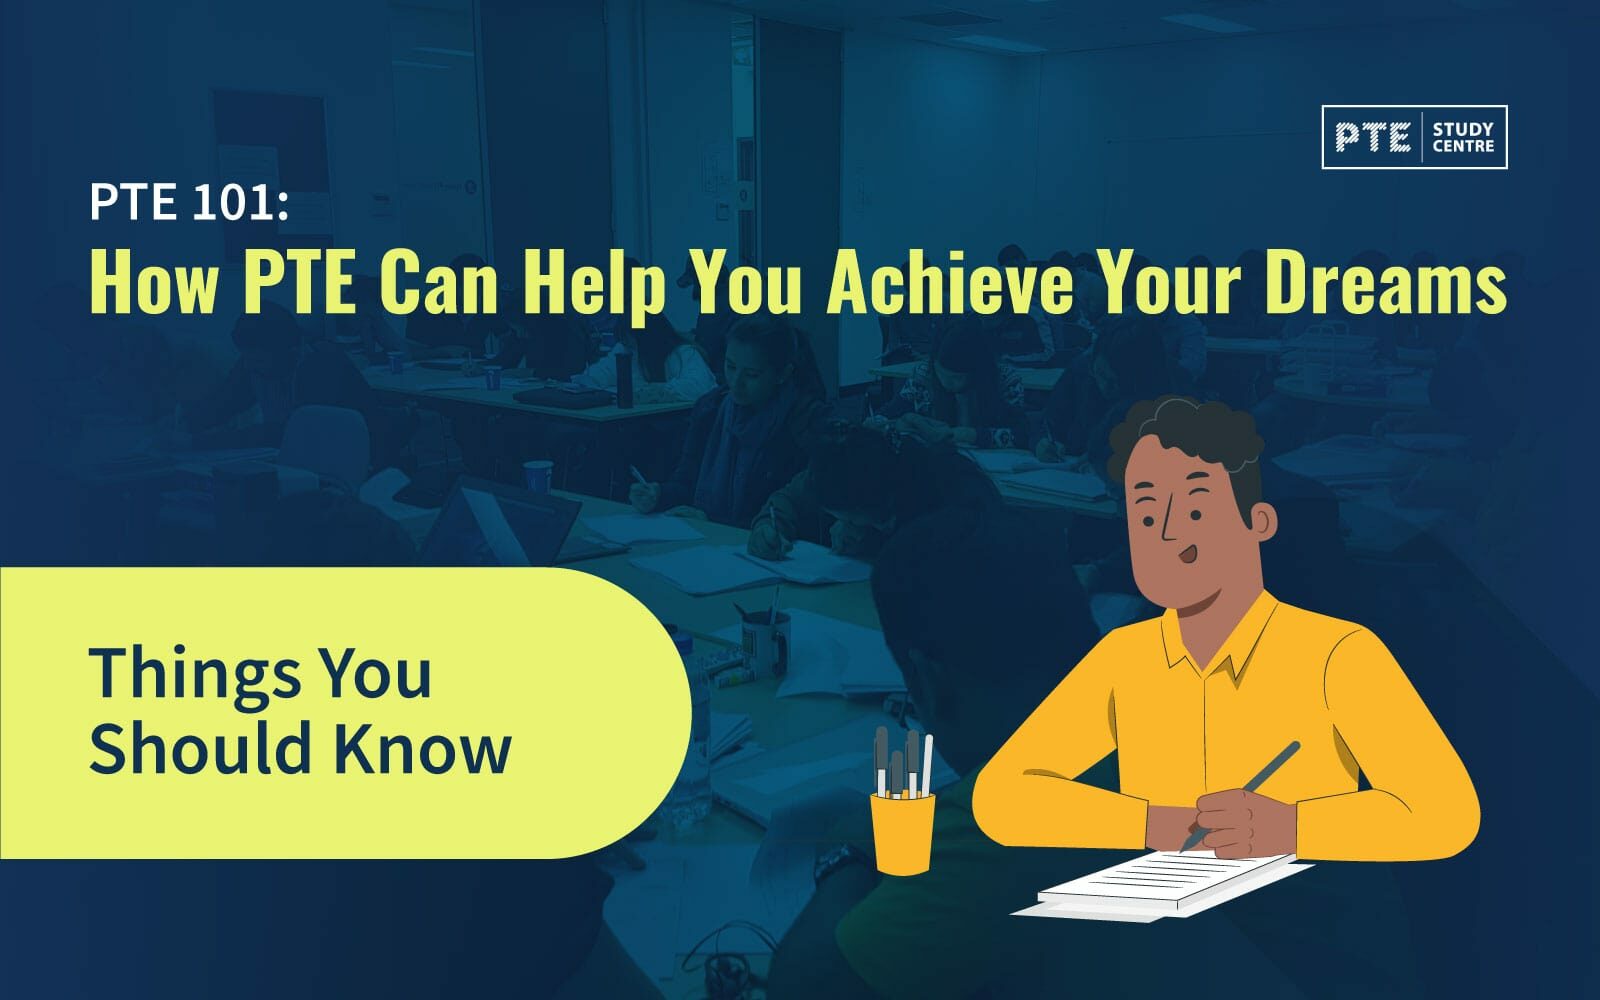 PTE 101: How PTE Can Help You Achieve Your Dreams